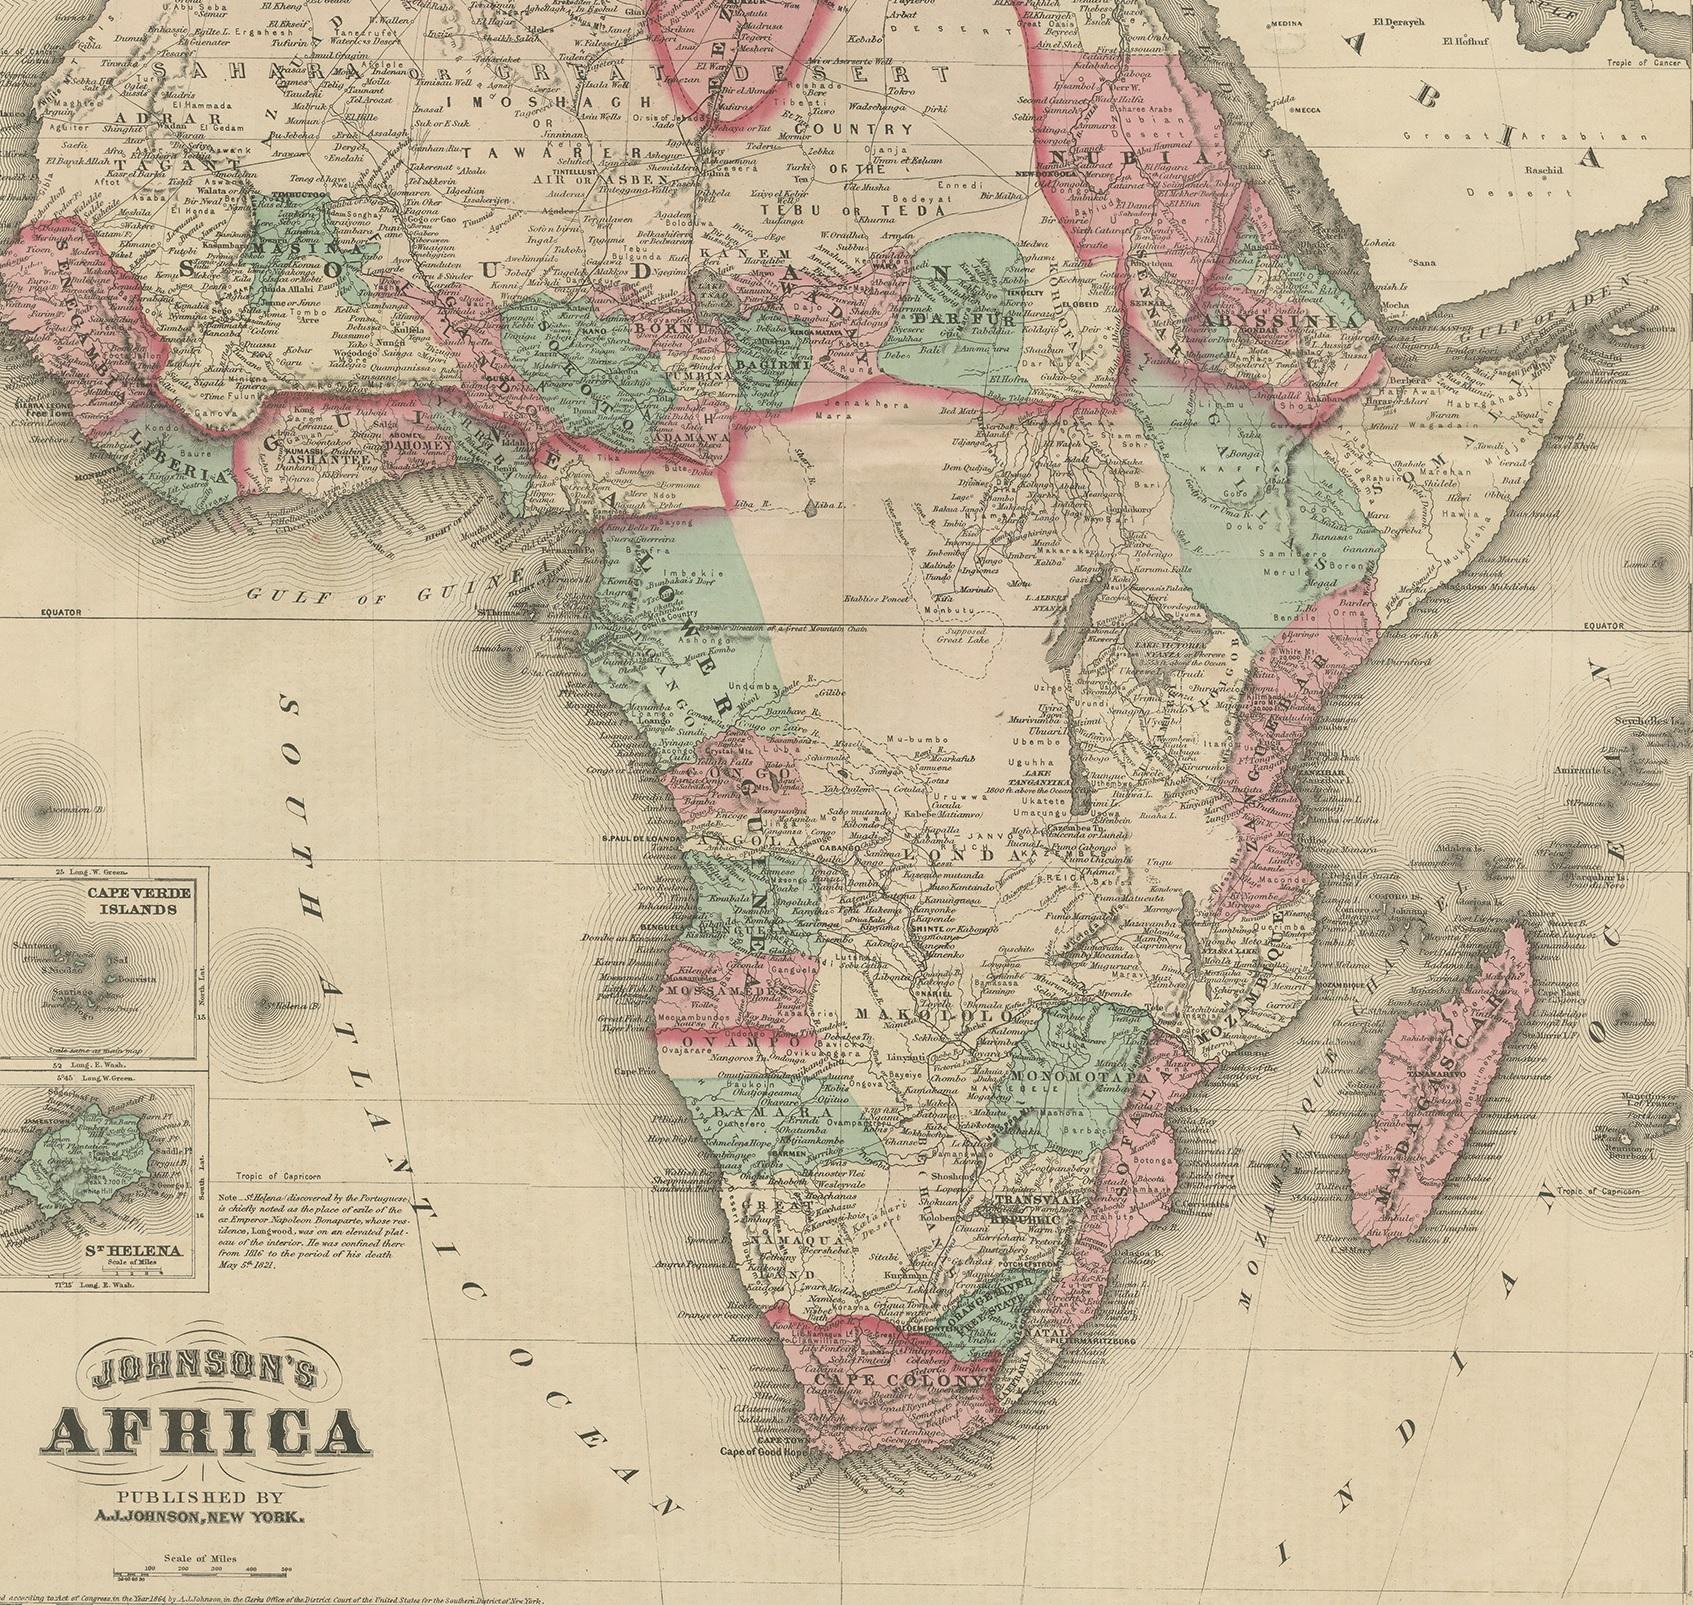 19th Century Antique Map of Africa by Johnson, '1872'